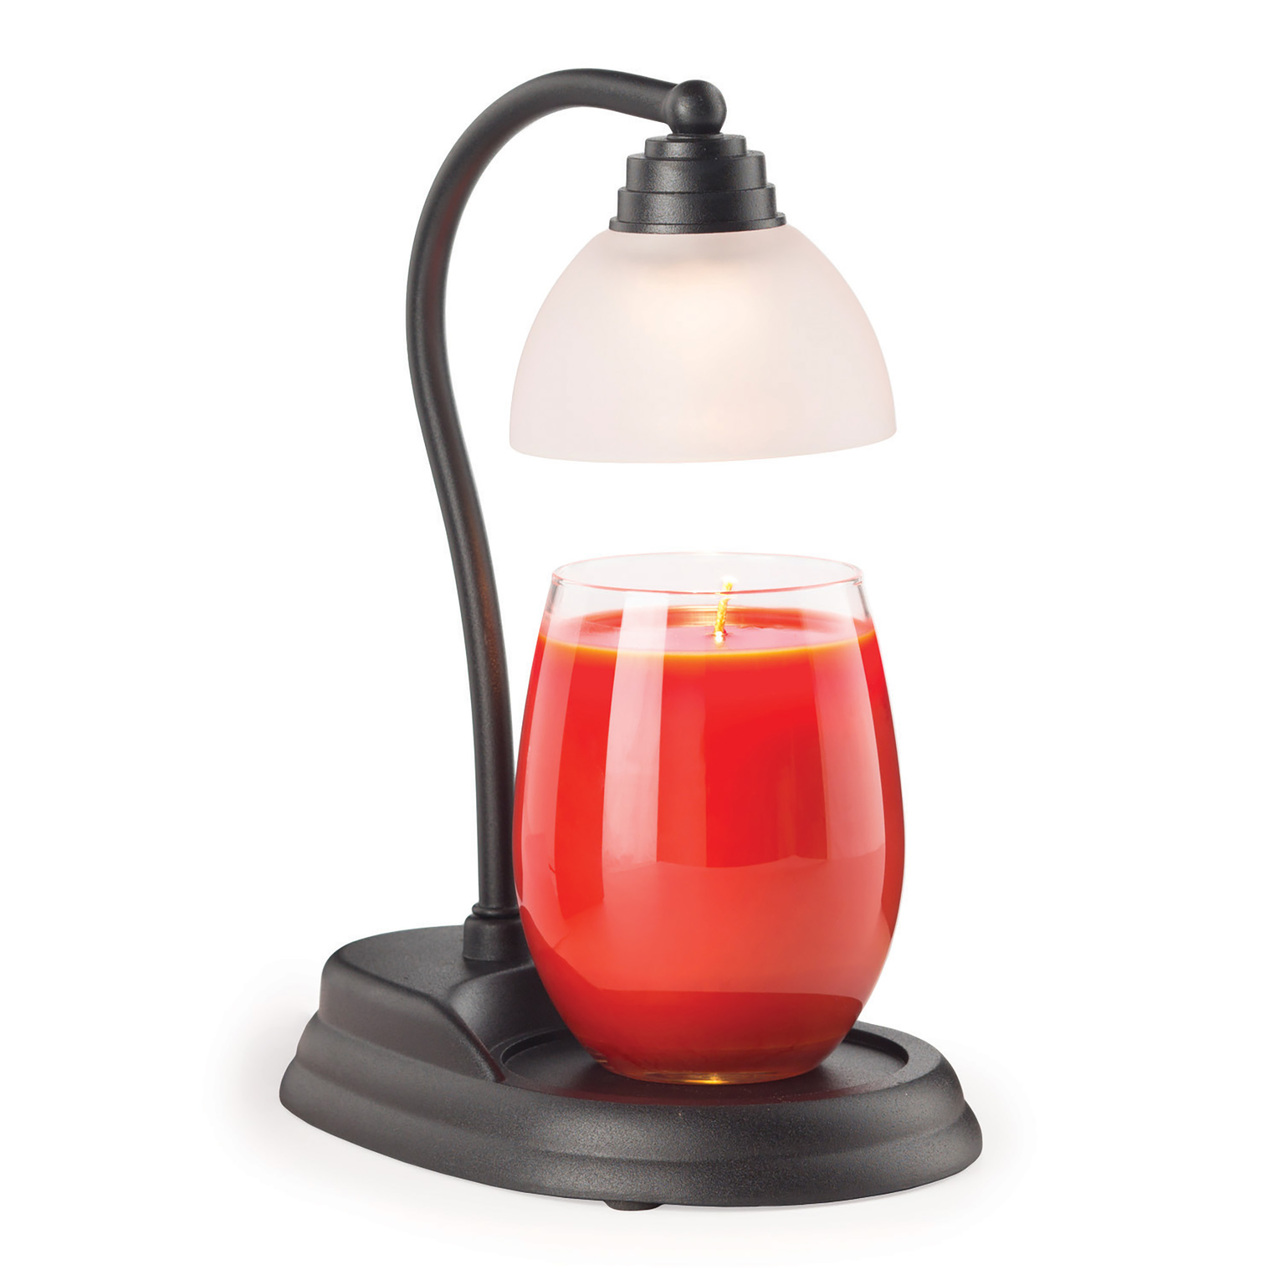 Candle Warmer Lamp Aurora Traditional Warming Bulb Frosted Shade Black 11 in. 